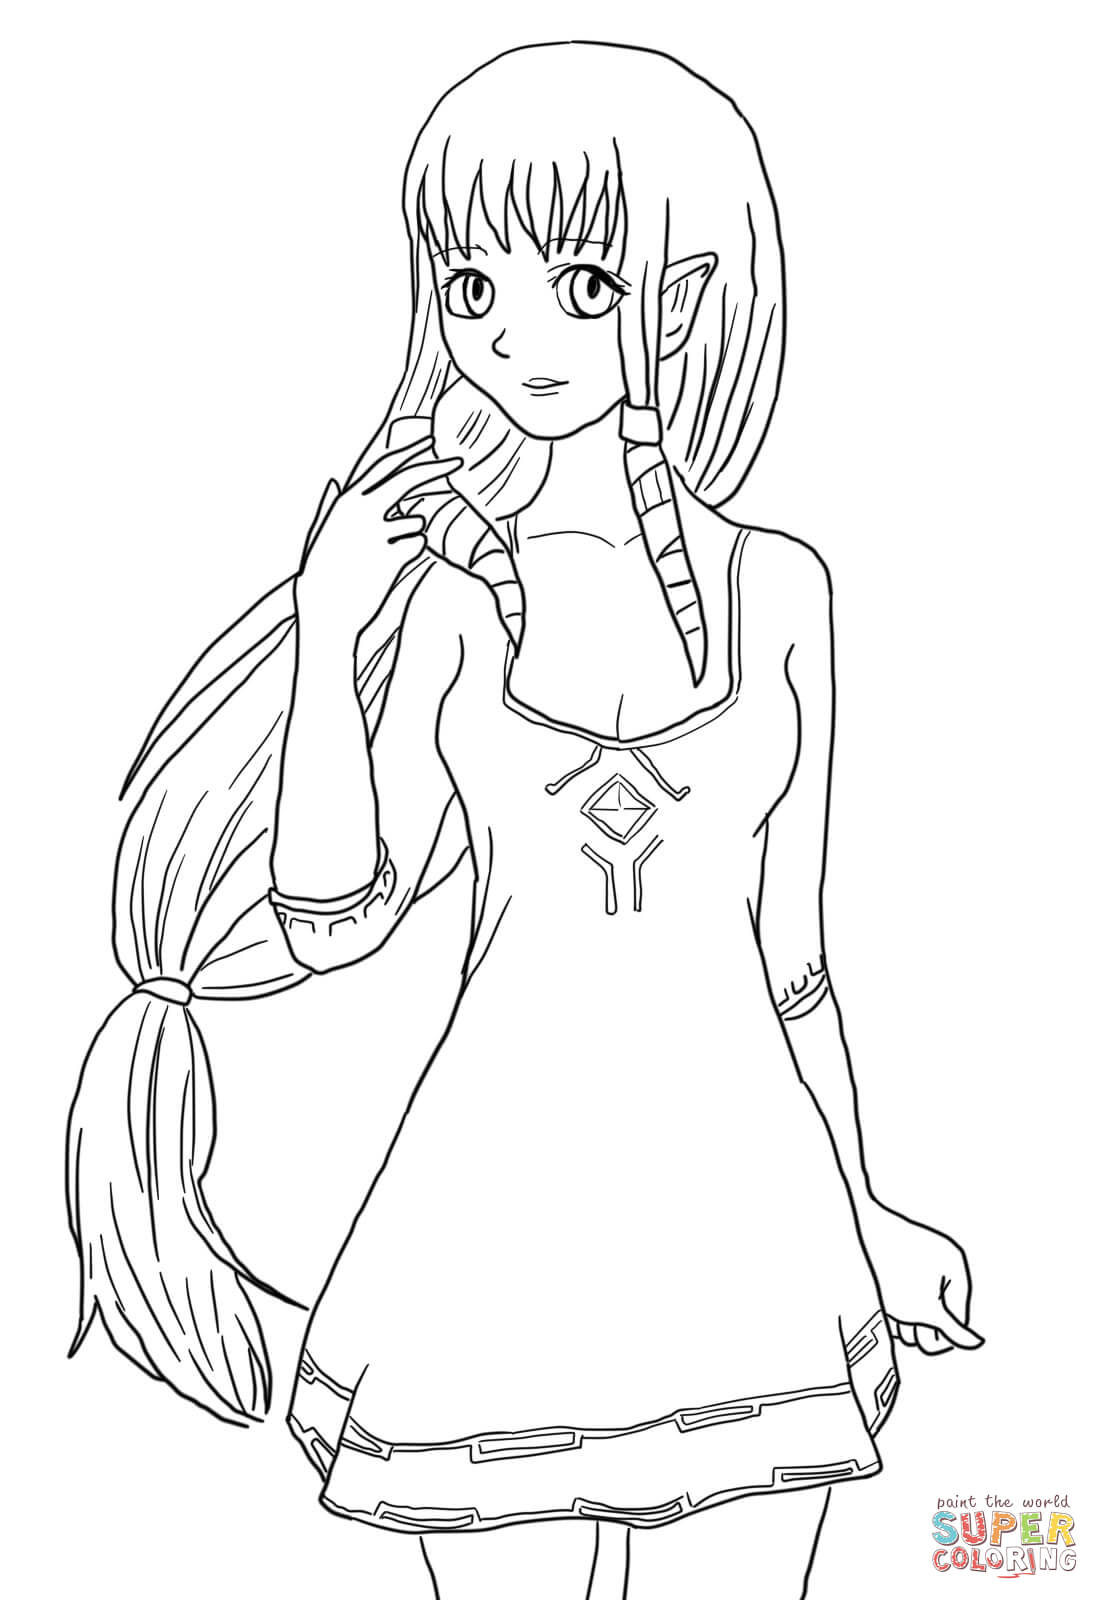 Cute zelda coloring page free printable coloring pages